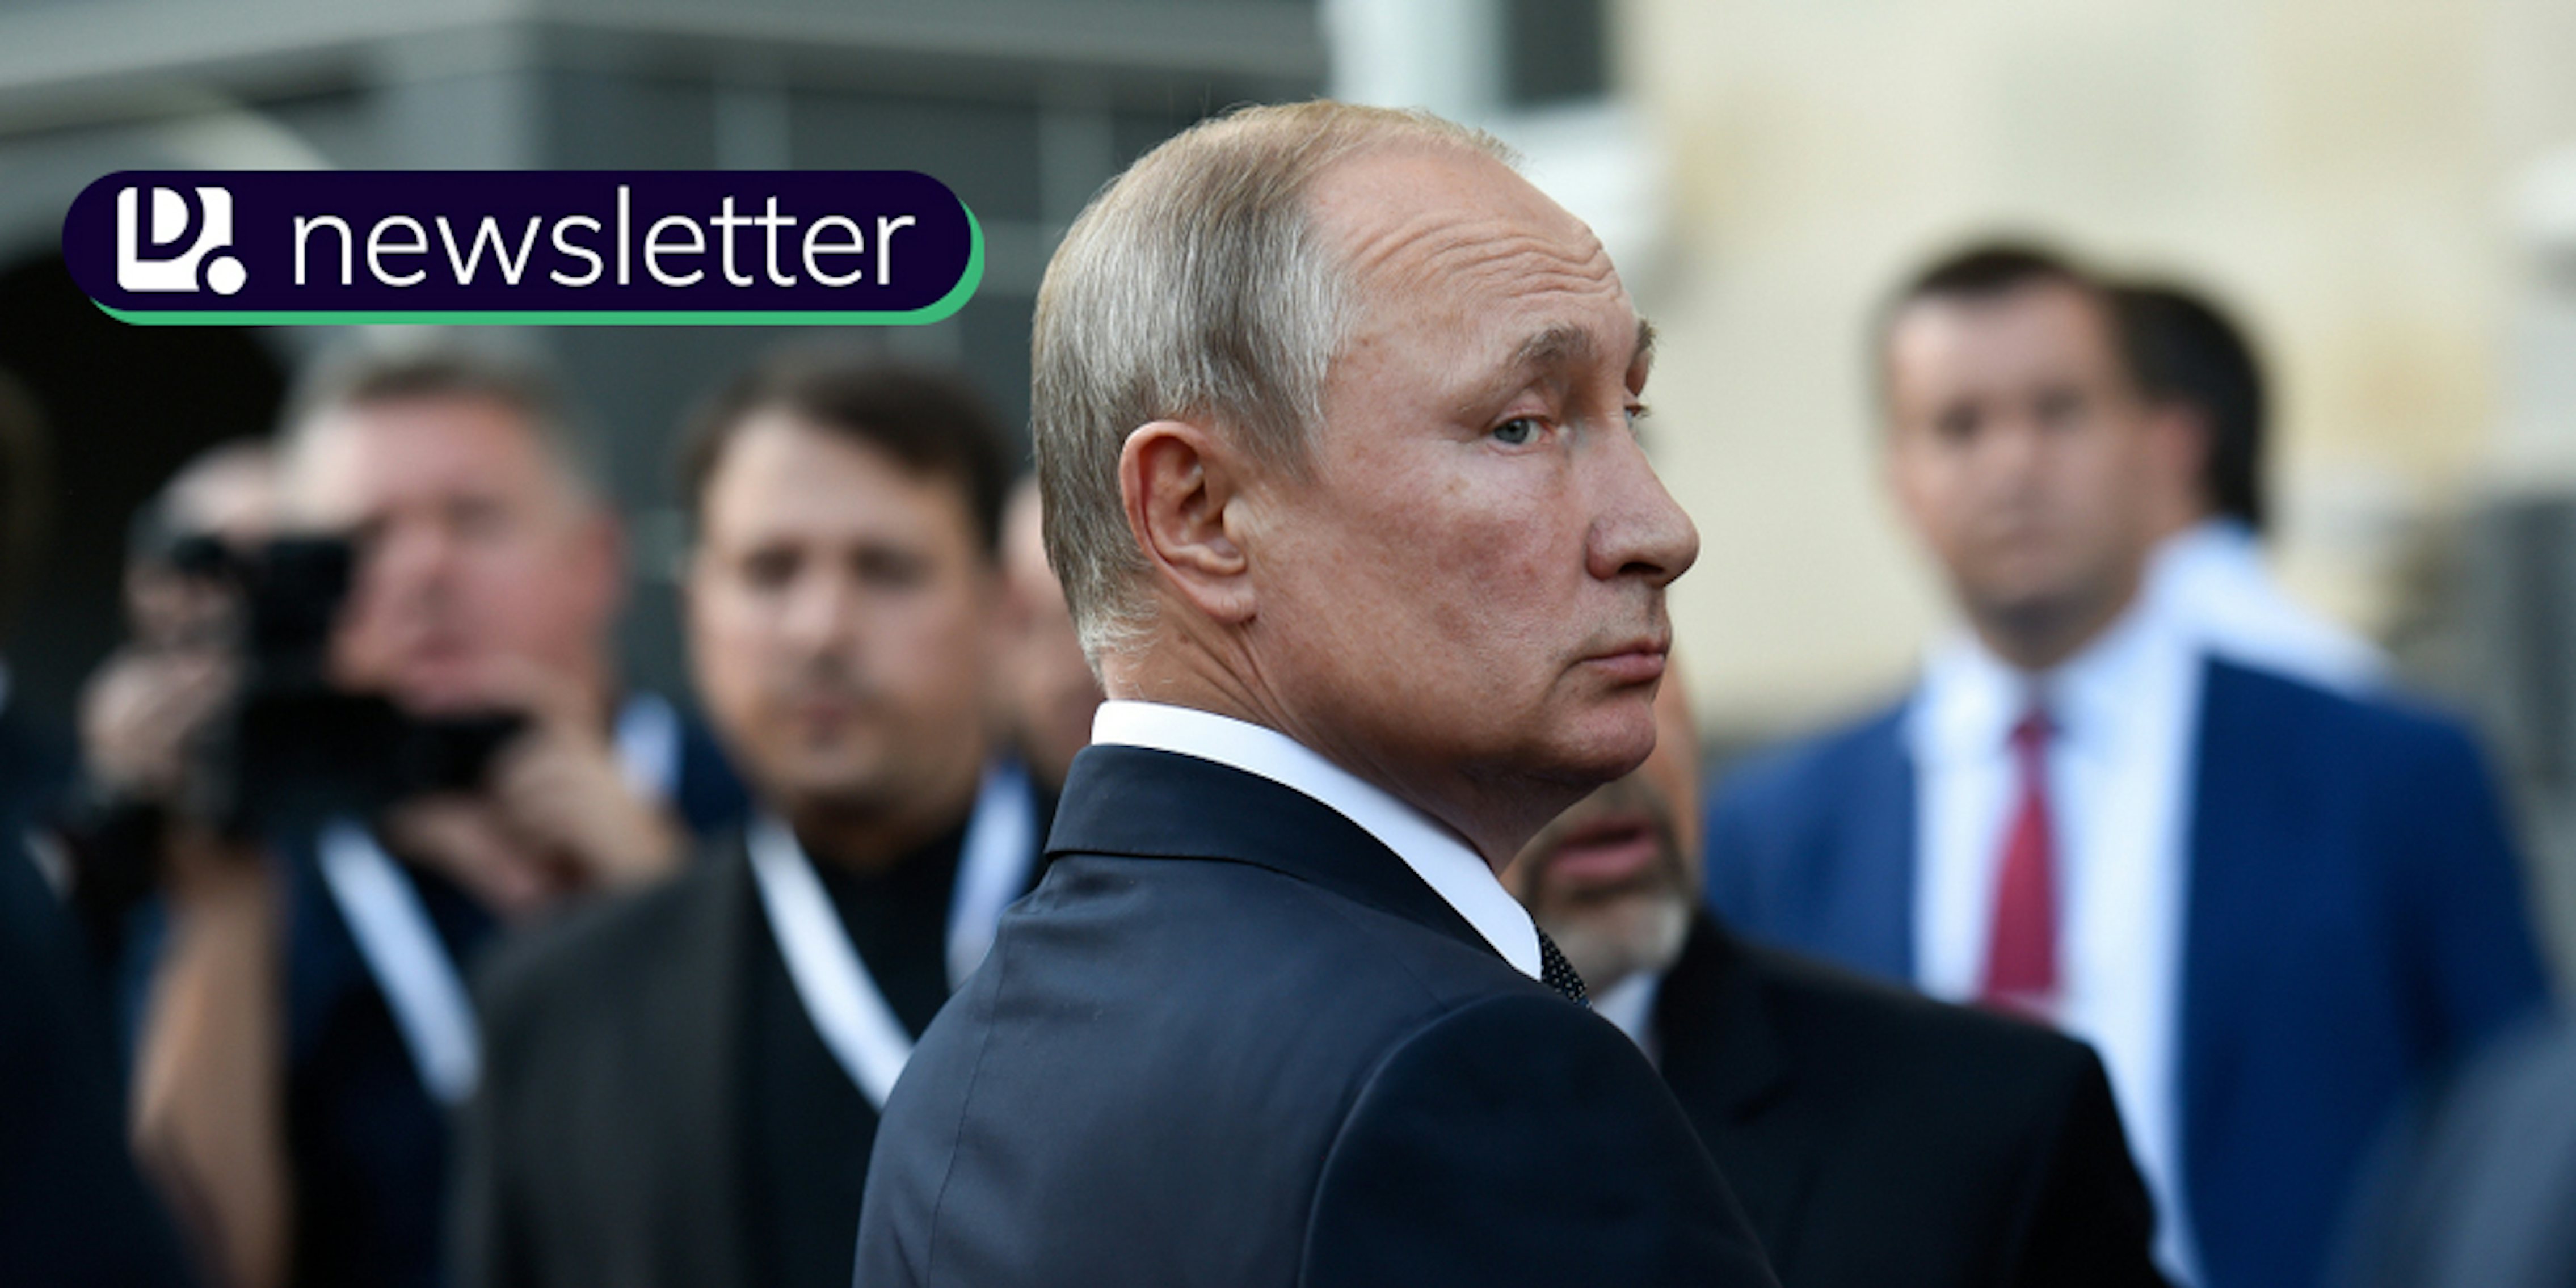 Vladimir Putin looking over his shoulder. In the top left corner is the Daily Dot newsletter logo.